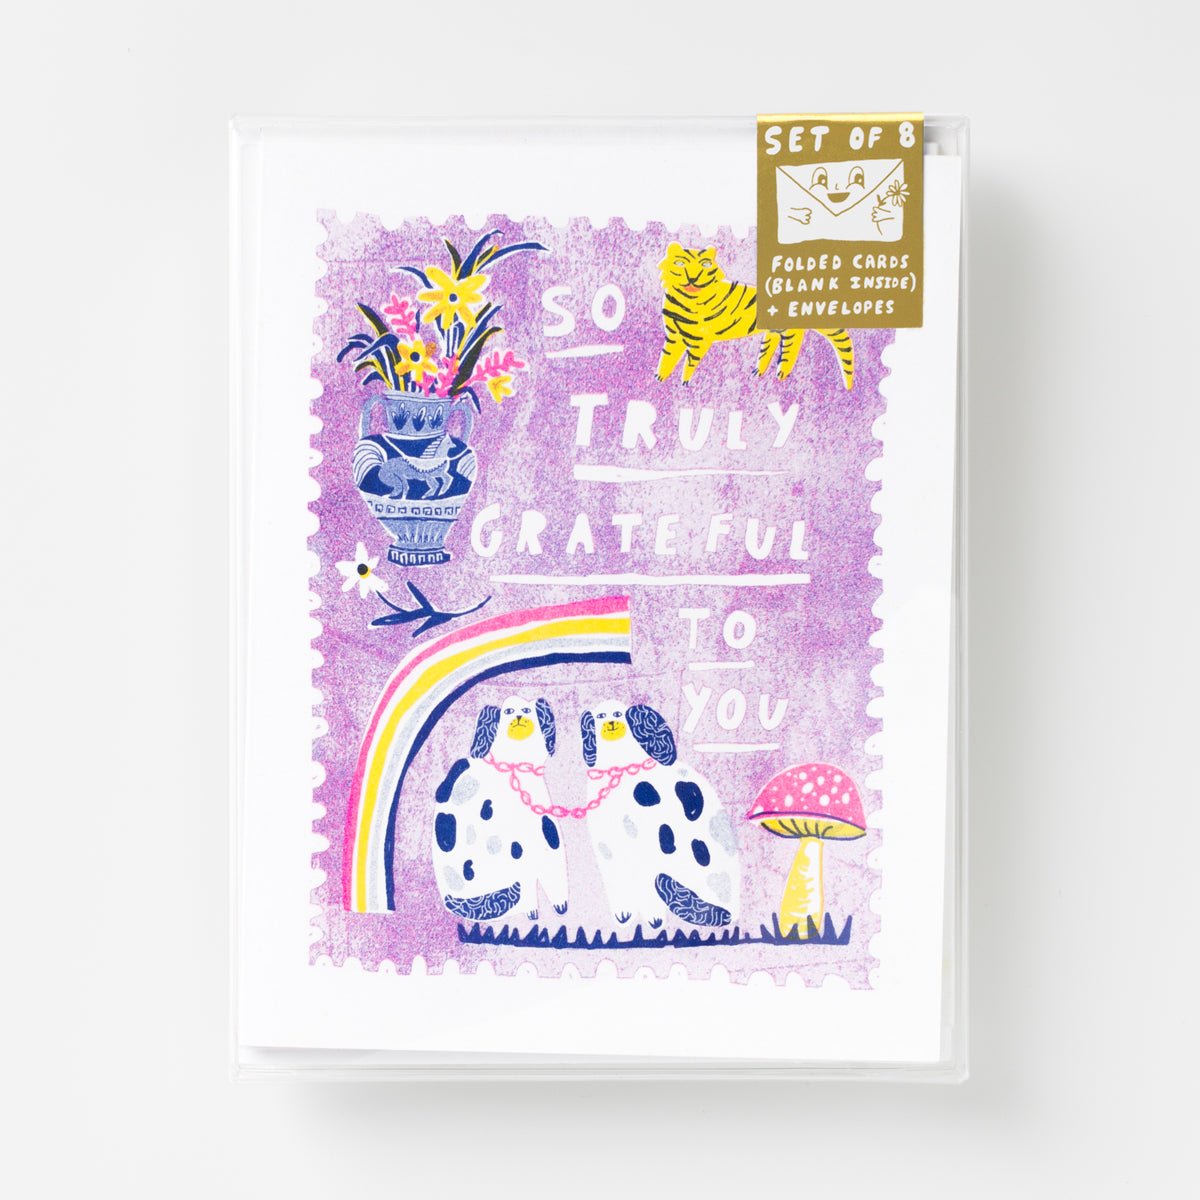 So Truly Grateful To You - Risograph Card Set - Yellow Owl Workshop